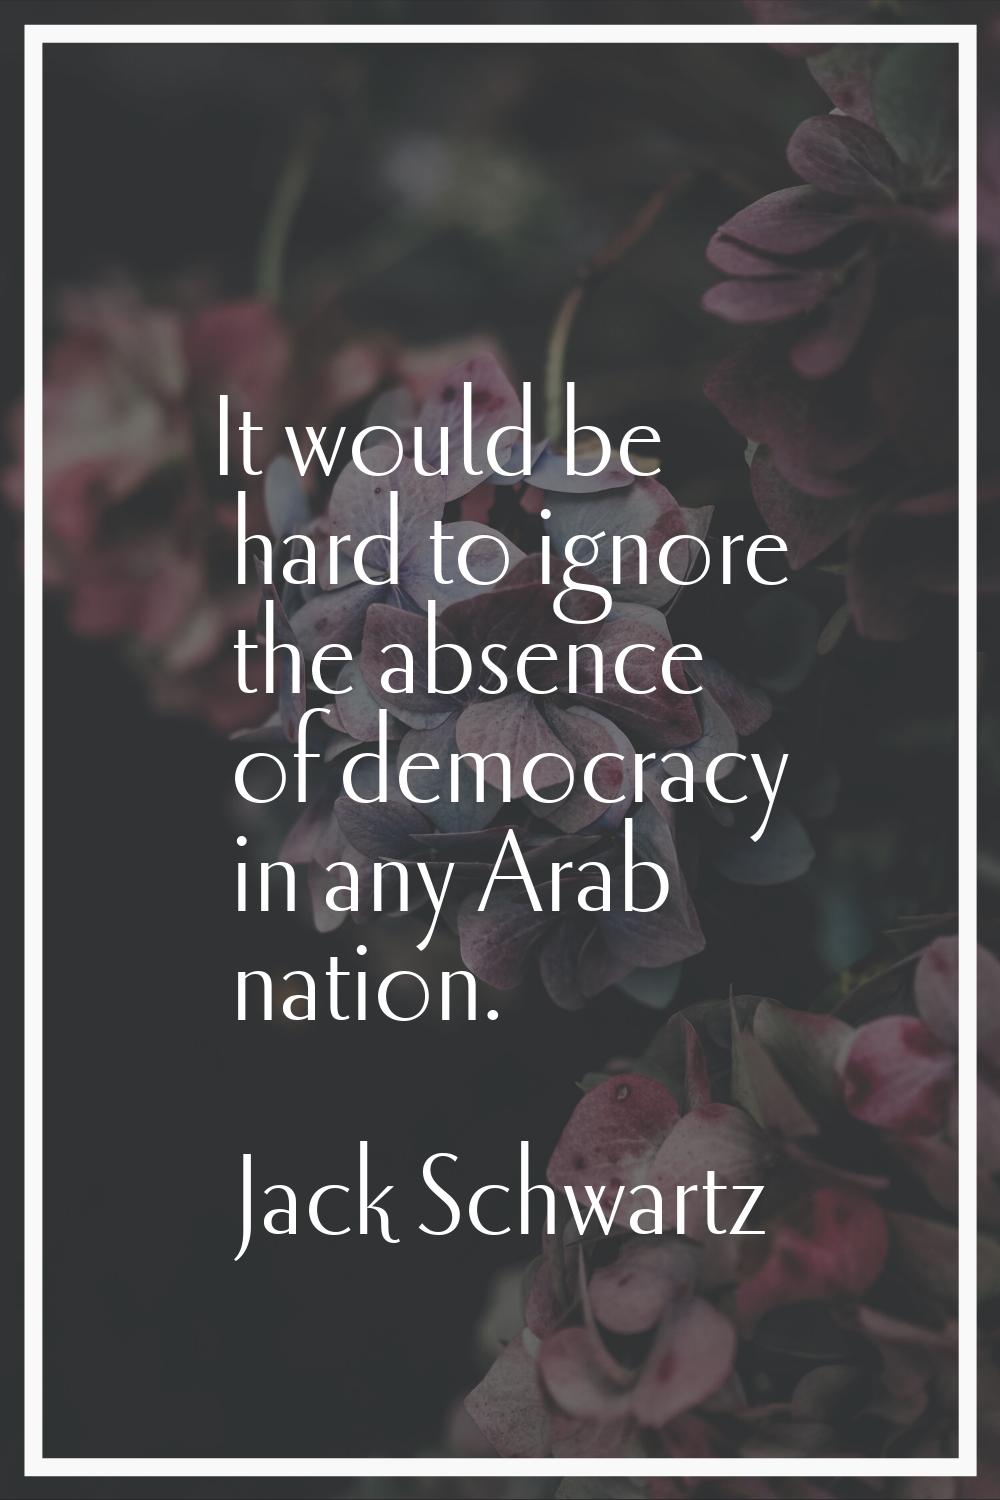 It would be hard to ignore the absence of democracy in any Arab nation.